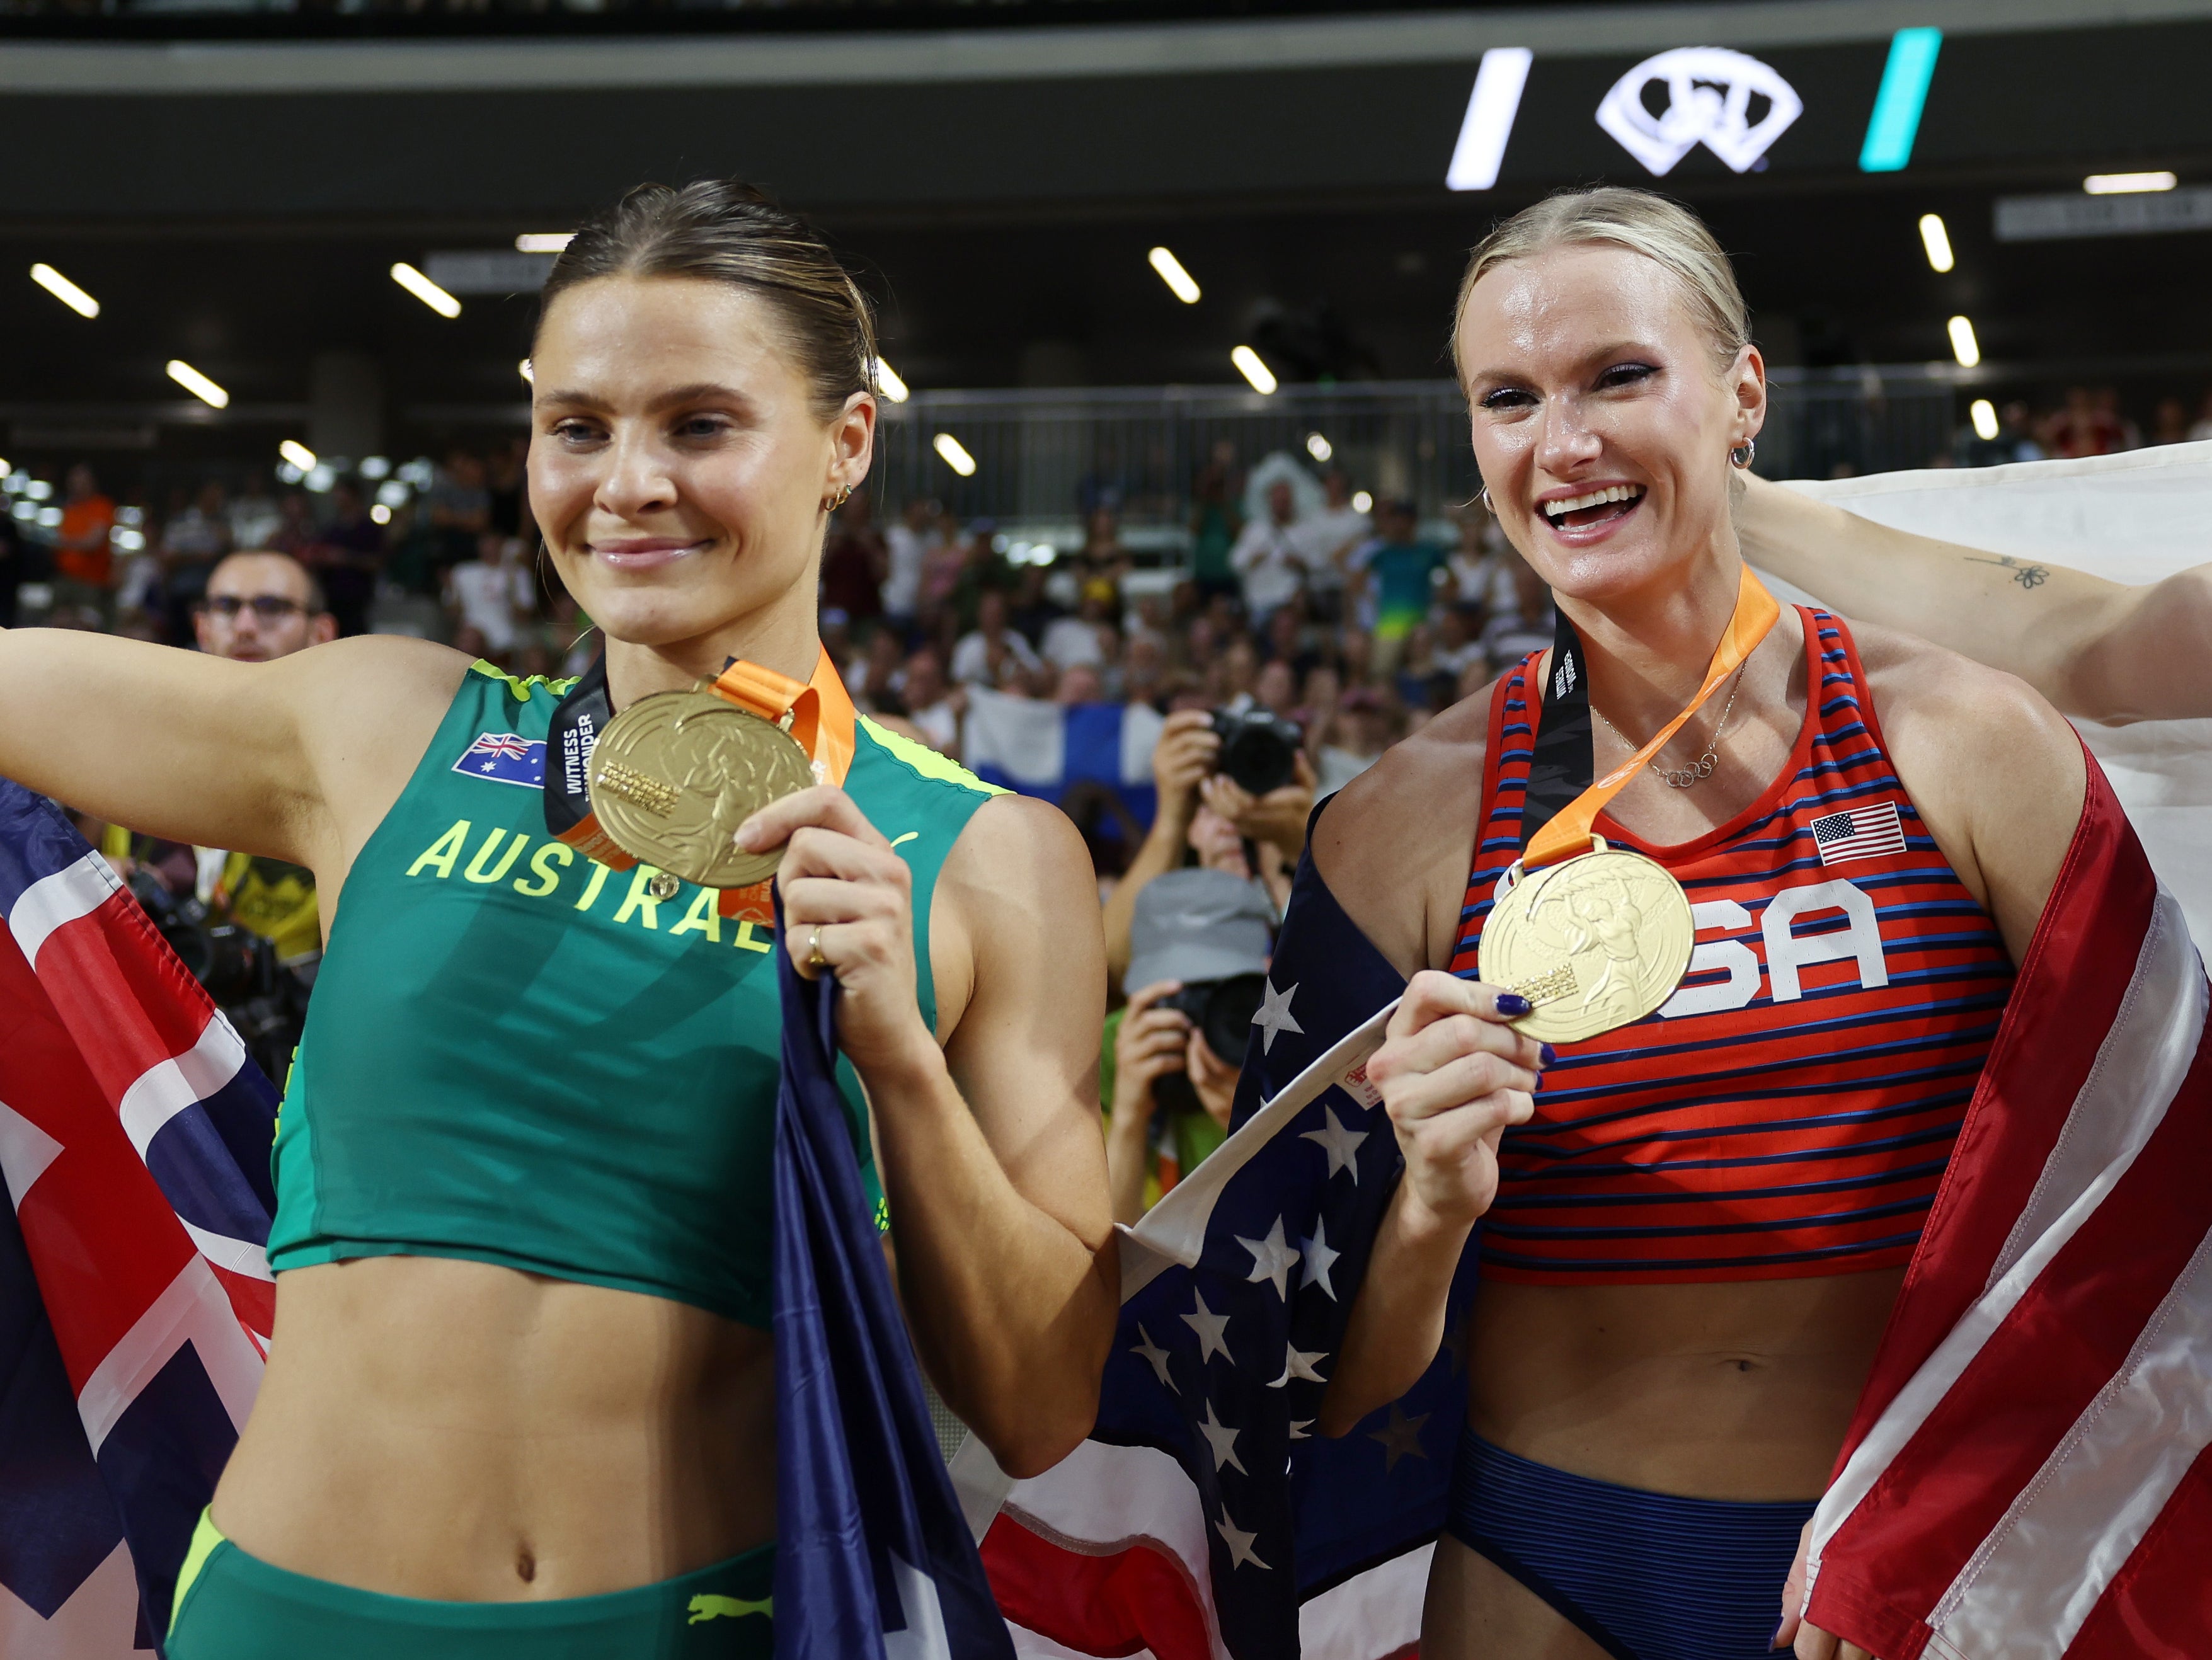 Pole vault pair agree to share gold medal at World Championships: 'Did we  just become best friends?!